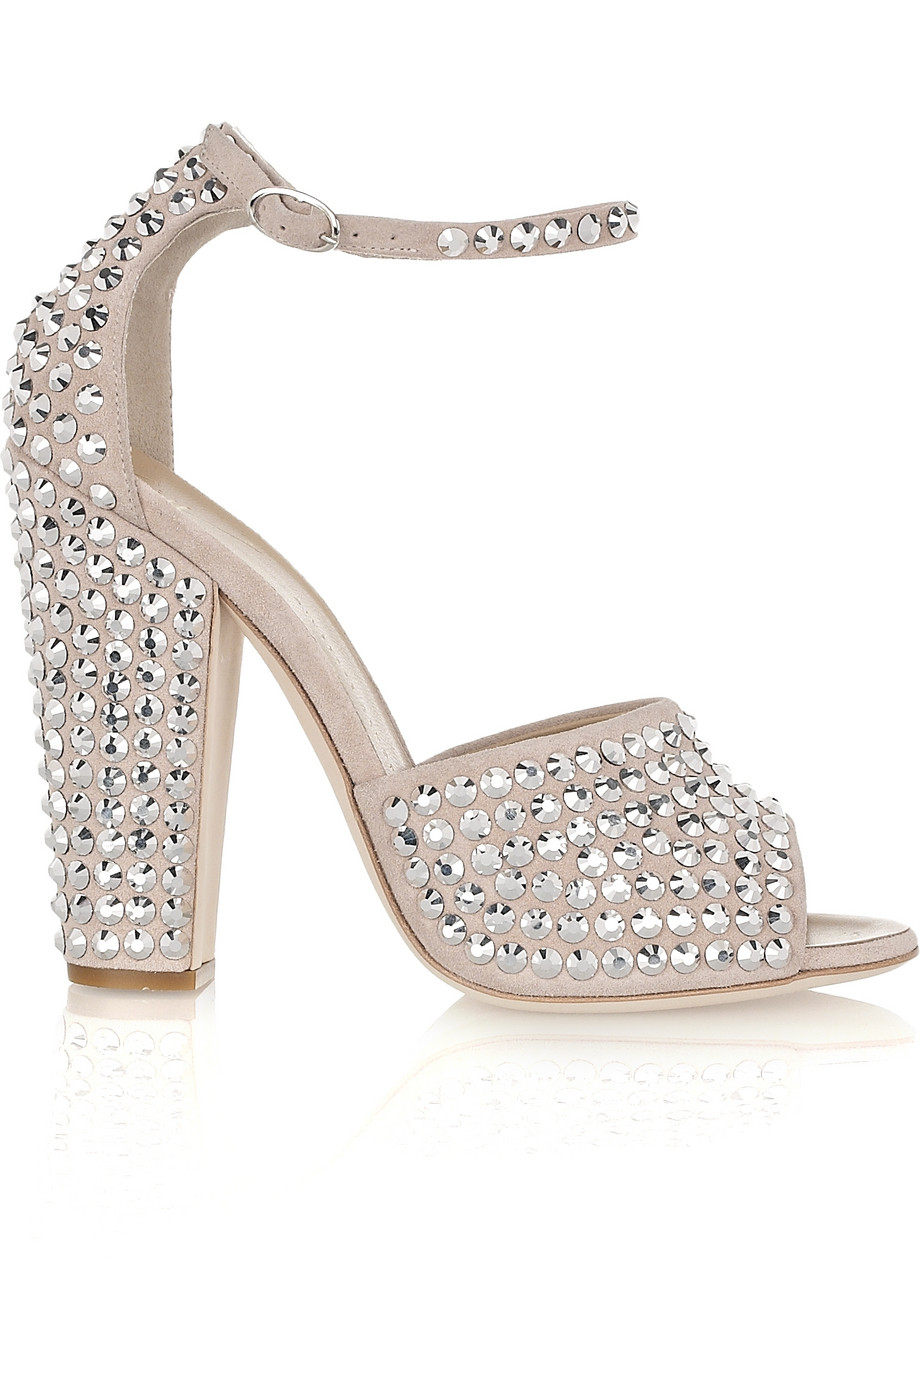 Lyst - Giuseppe zanotti Crystal-embellished Suede Sandals in Metallic